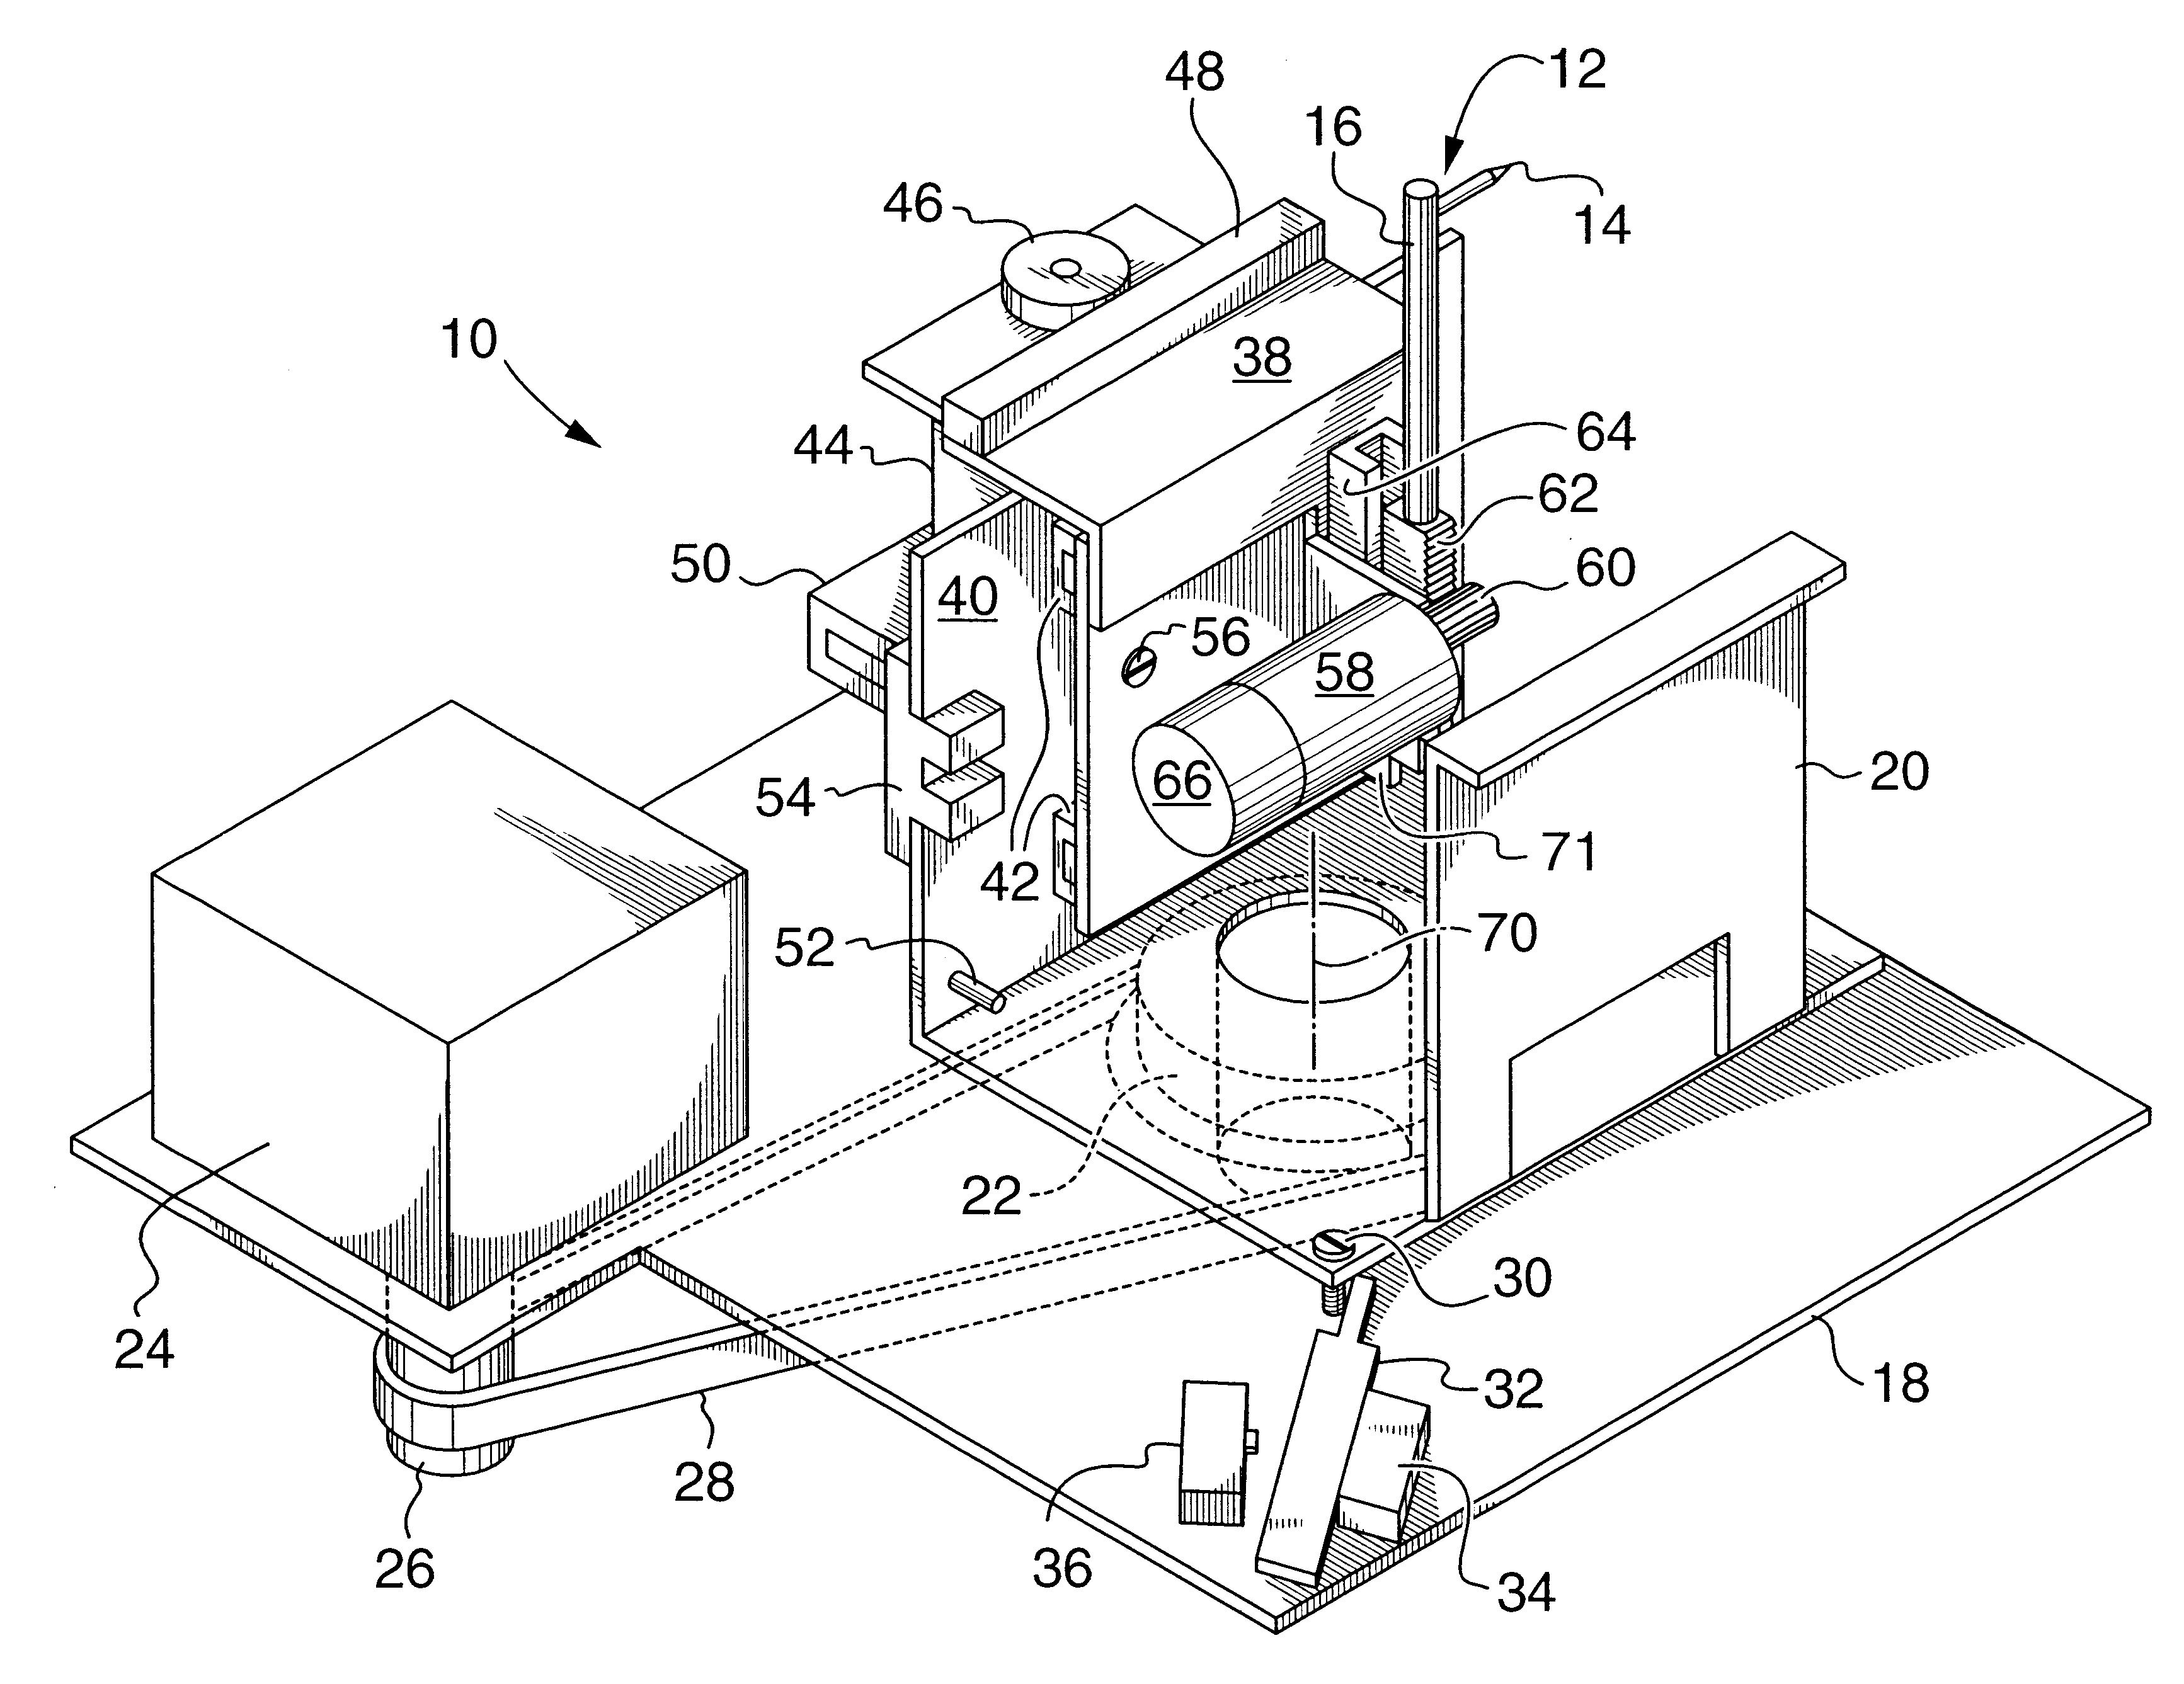 Eyeglass frame and lens tracing apparatus and method